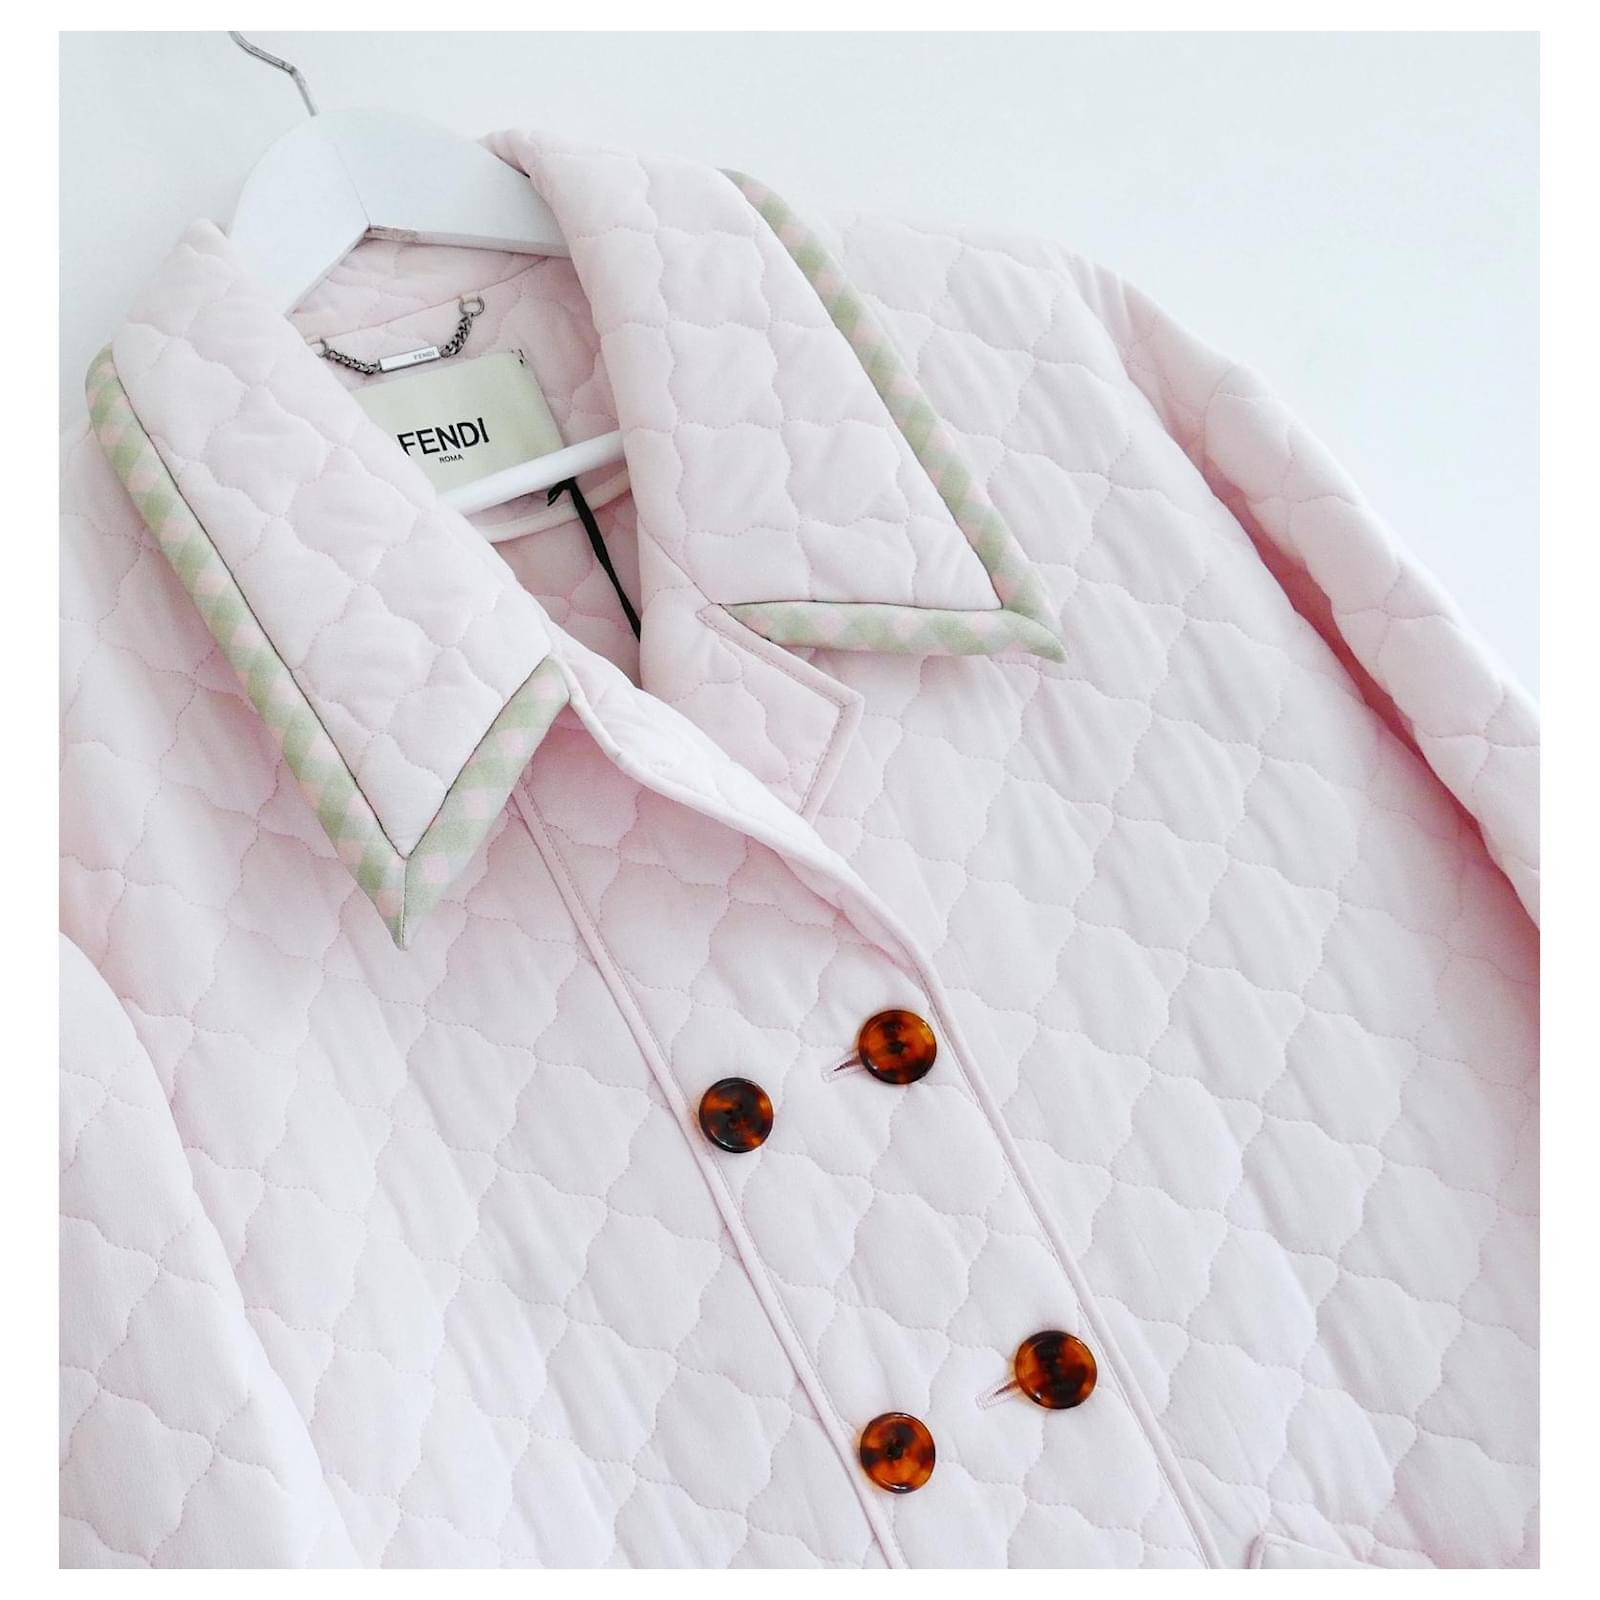 Utterly delicious Fendi quilted jacket. From SS20 and this was part of the first look on the runway. bought for £2650 and new with tags/spare buttons. Made from lightweight pale pink quilted washed silk crepe de chine with contrast check pattern